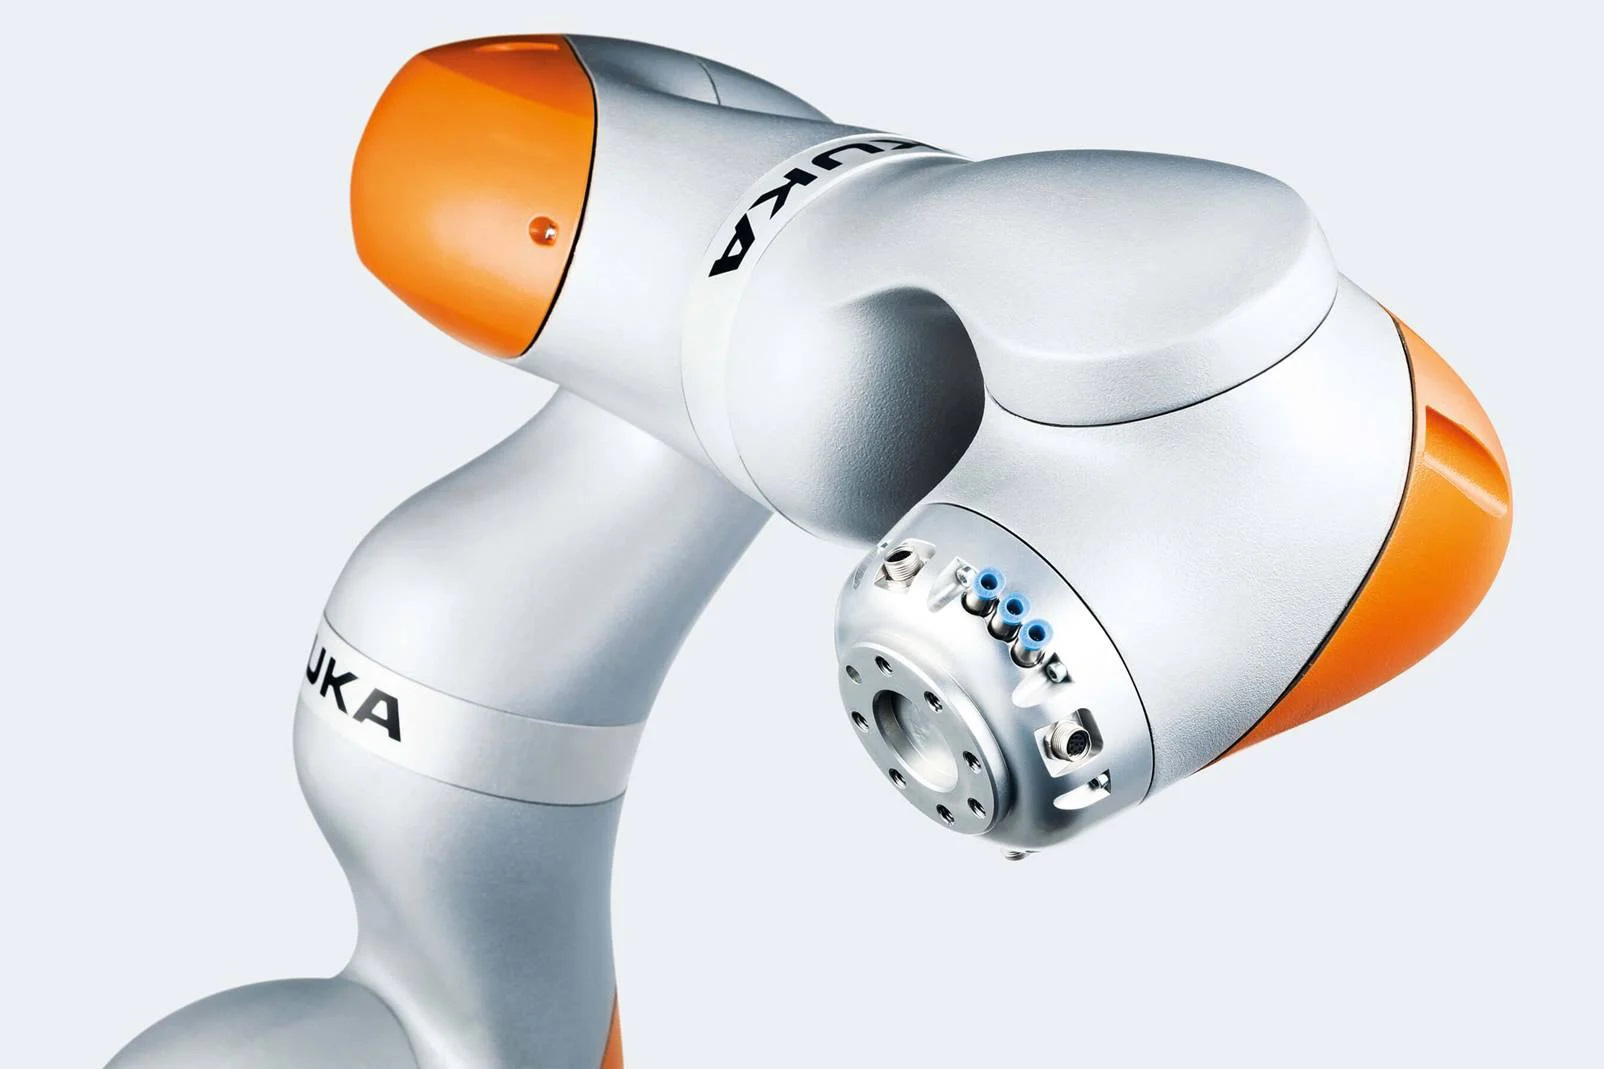 KUKA Robots offers industrial robots in various versions with various payload capacities and reaches.